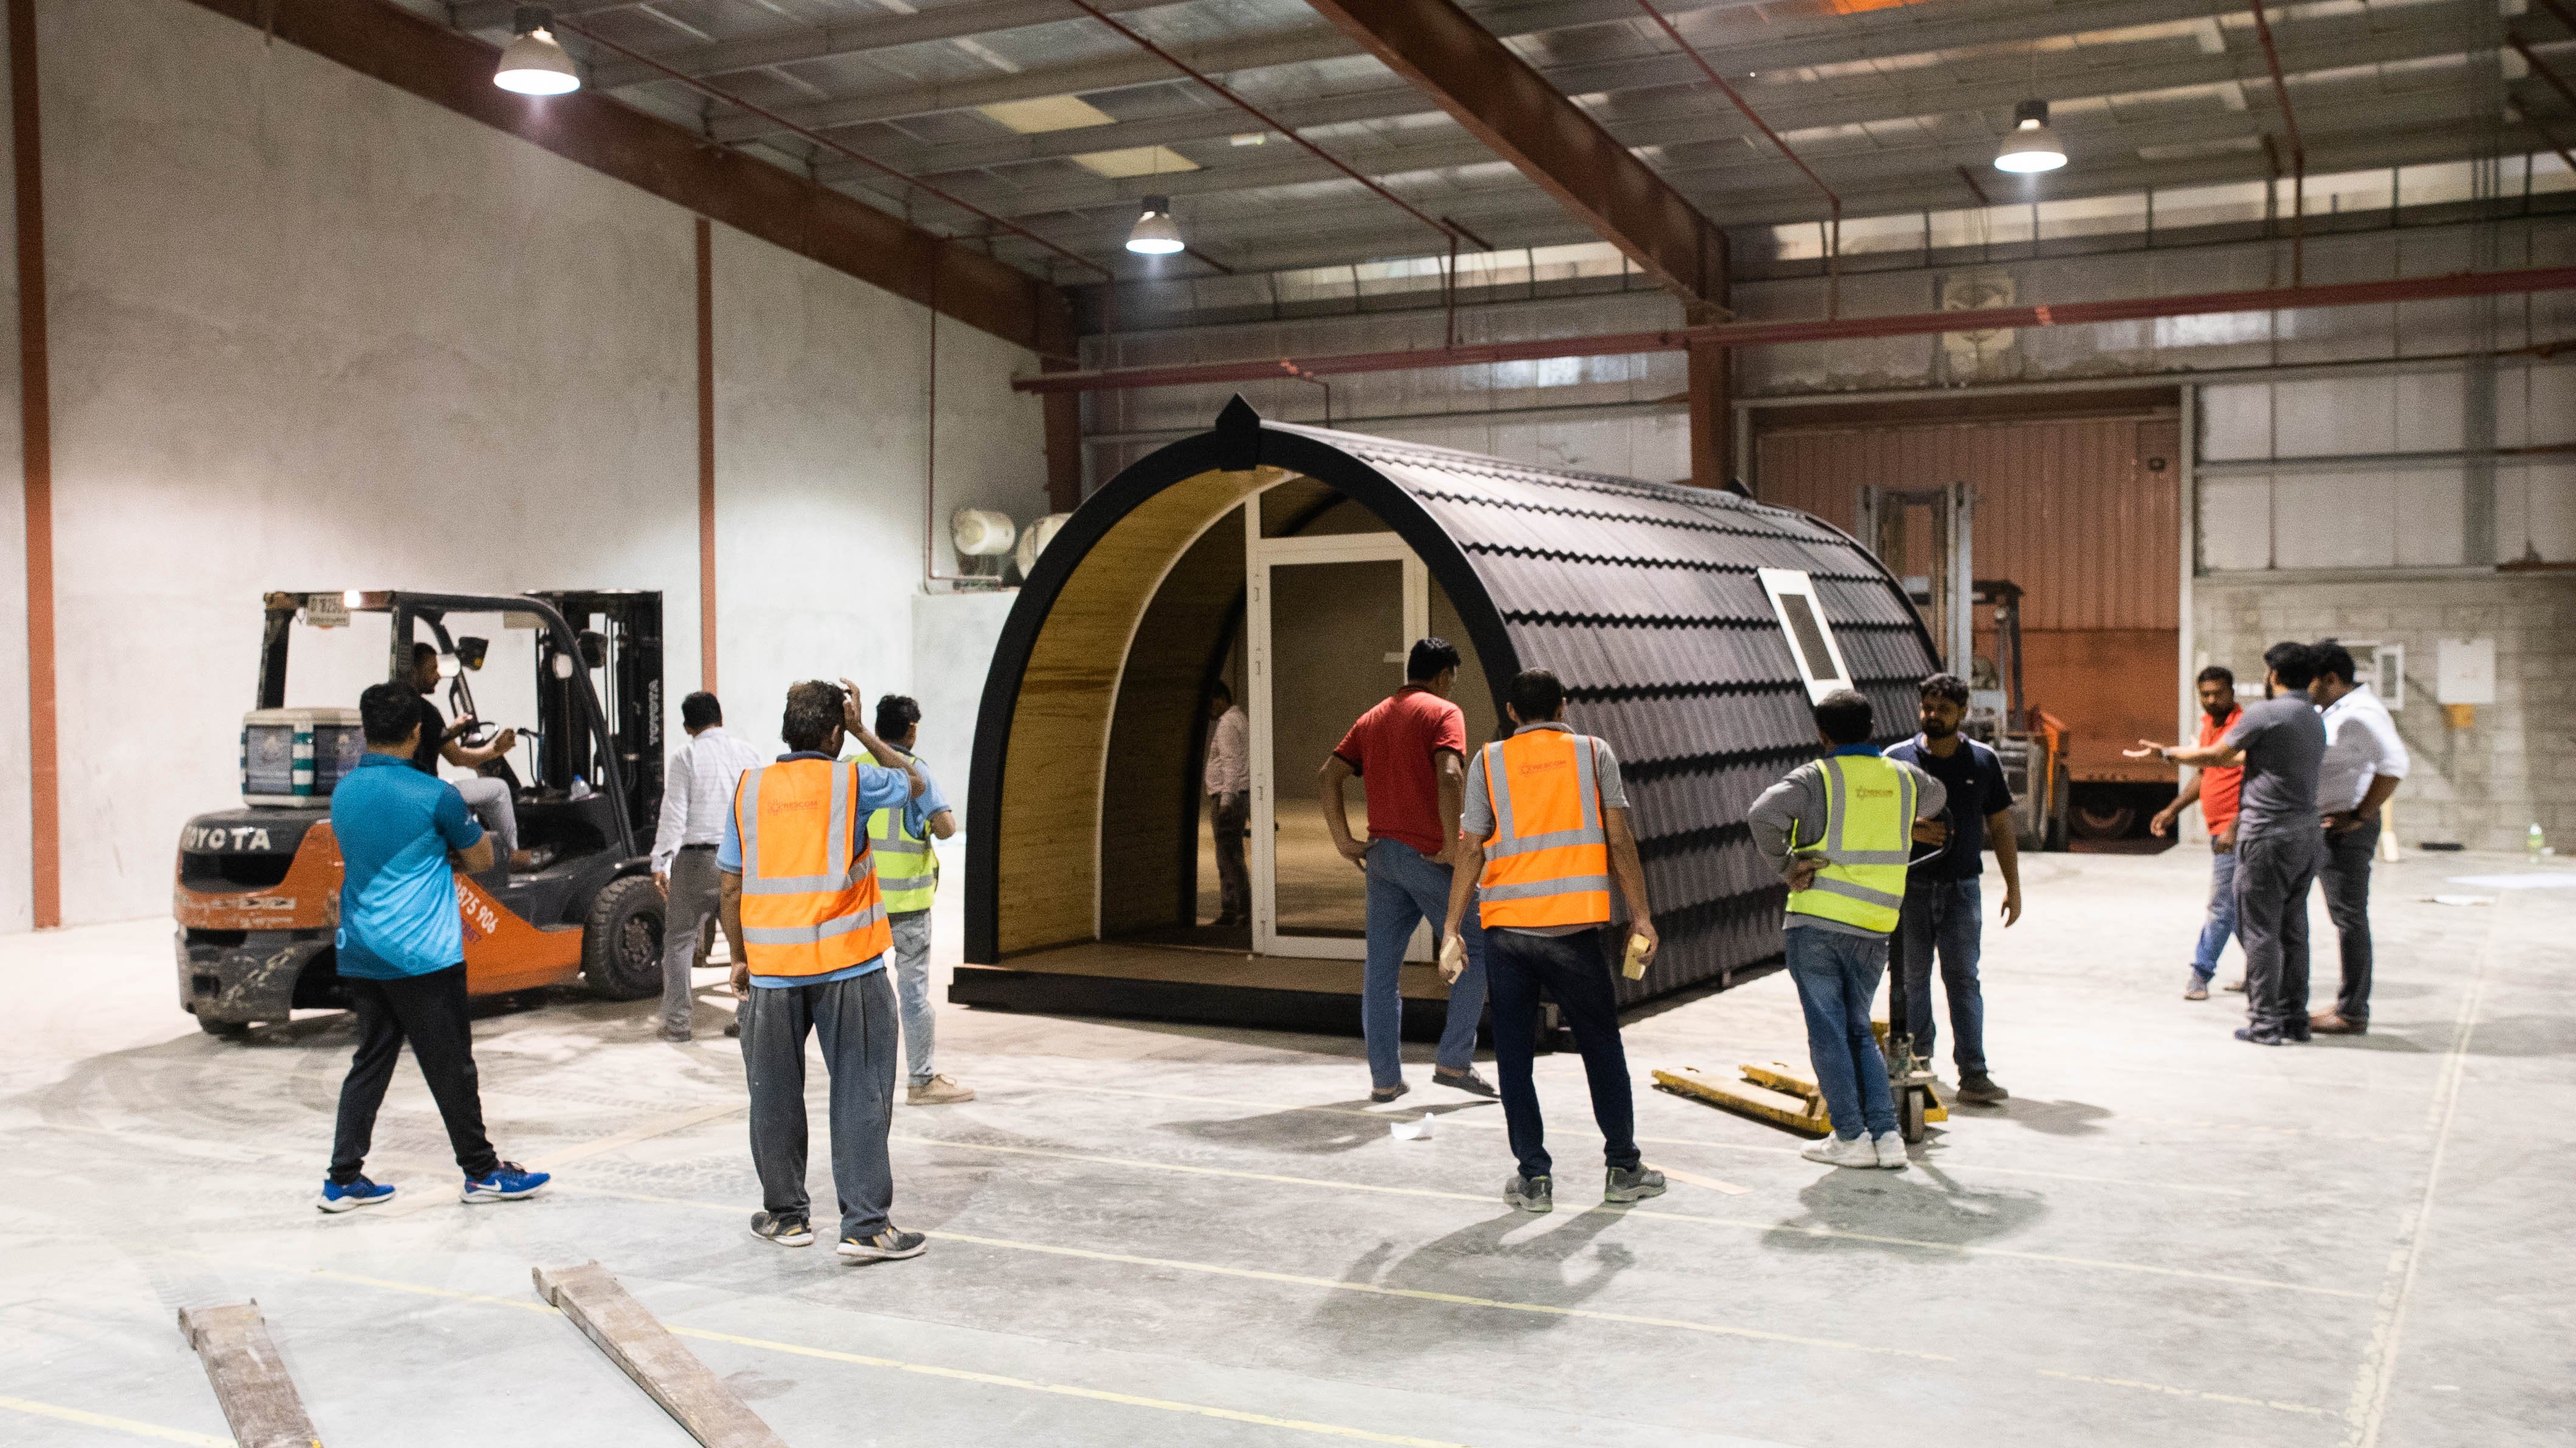 glamping pod being delivered from glampitect factory